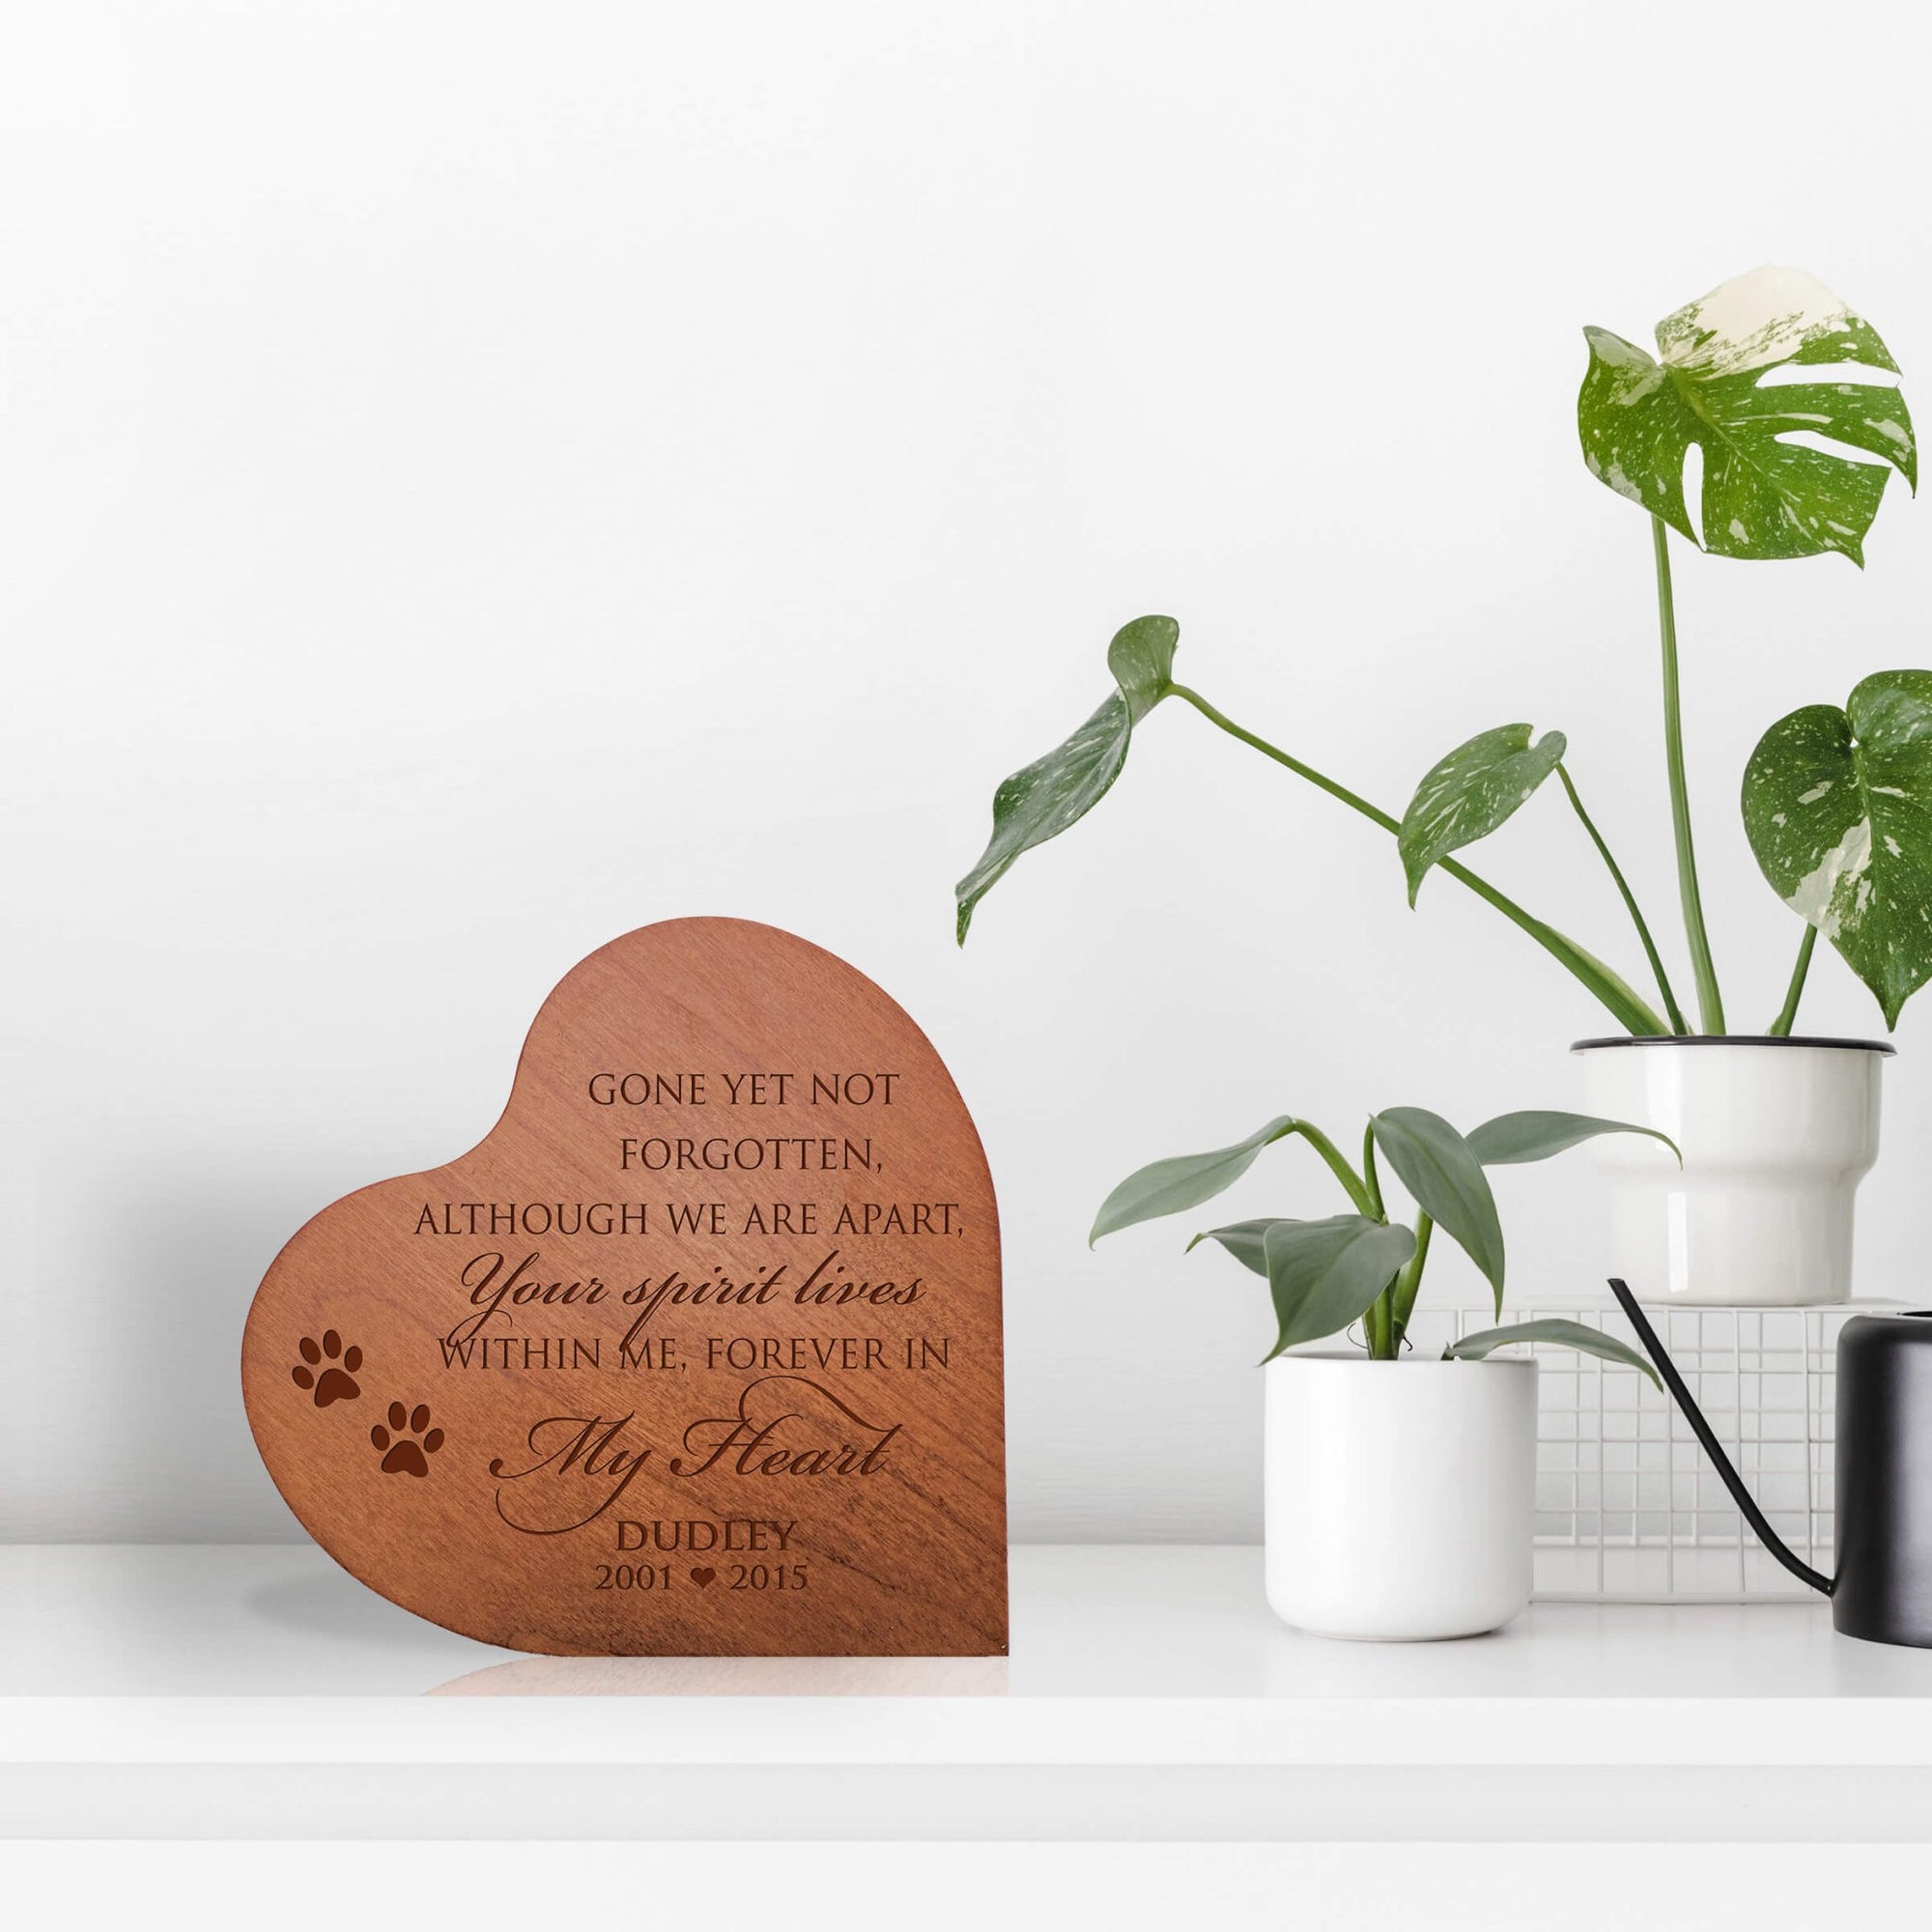 Personalized Small Heart Cremation Urn Keepsake For Pet Ashes - Gone Yet Not Forgotten - LifeSong Milestones